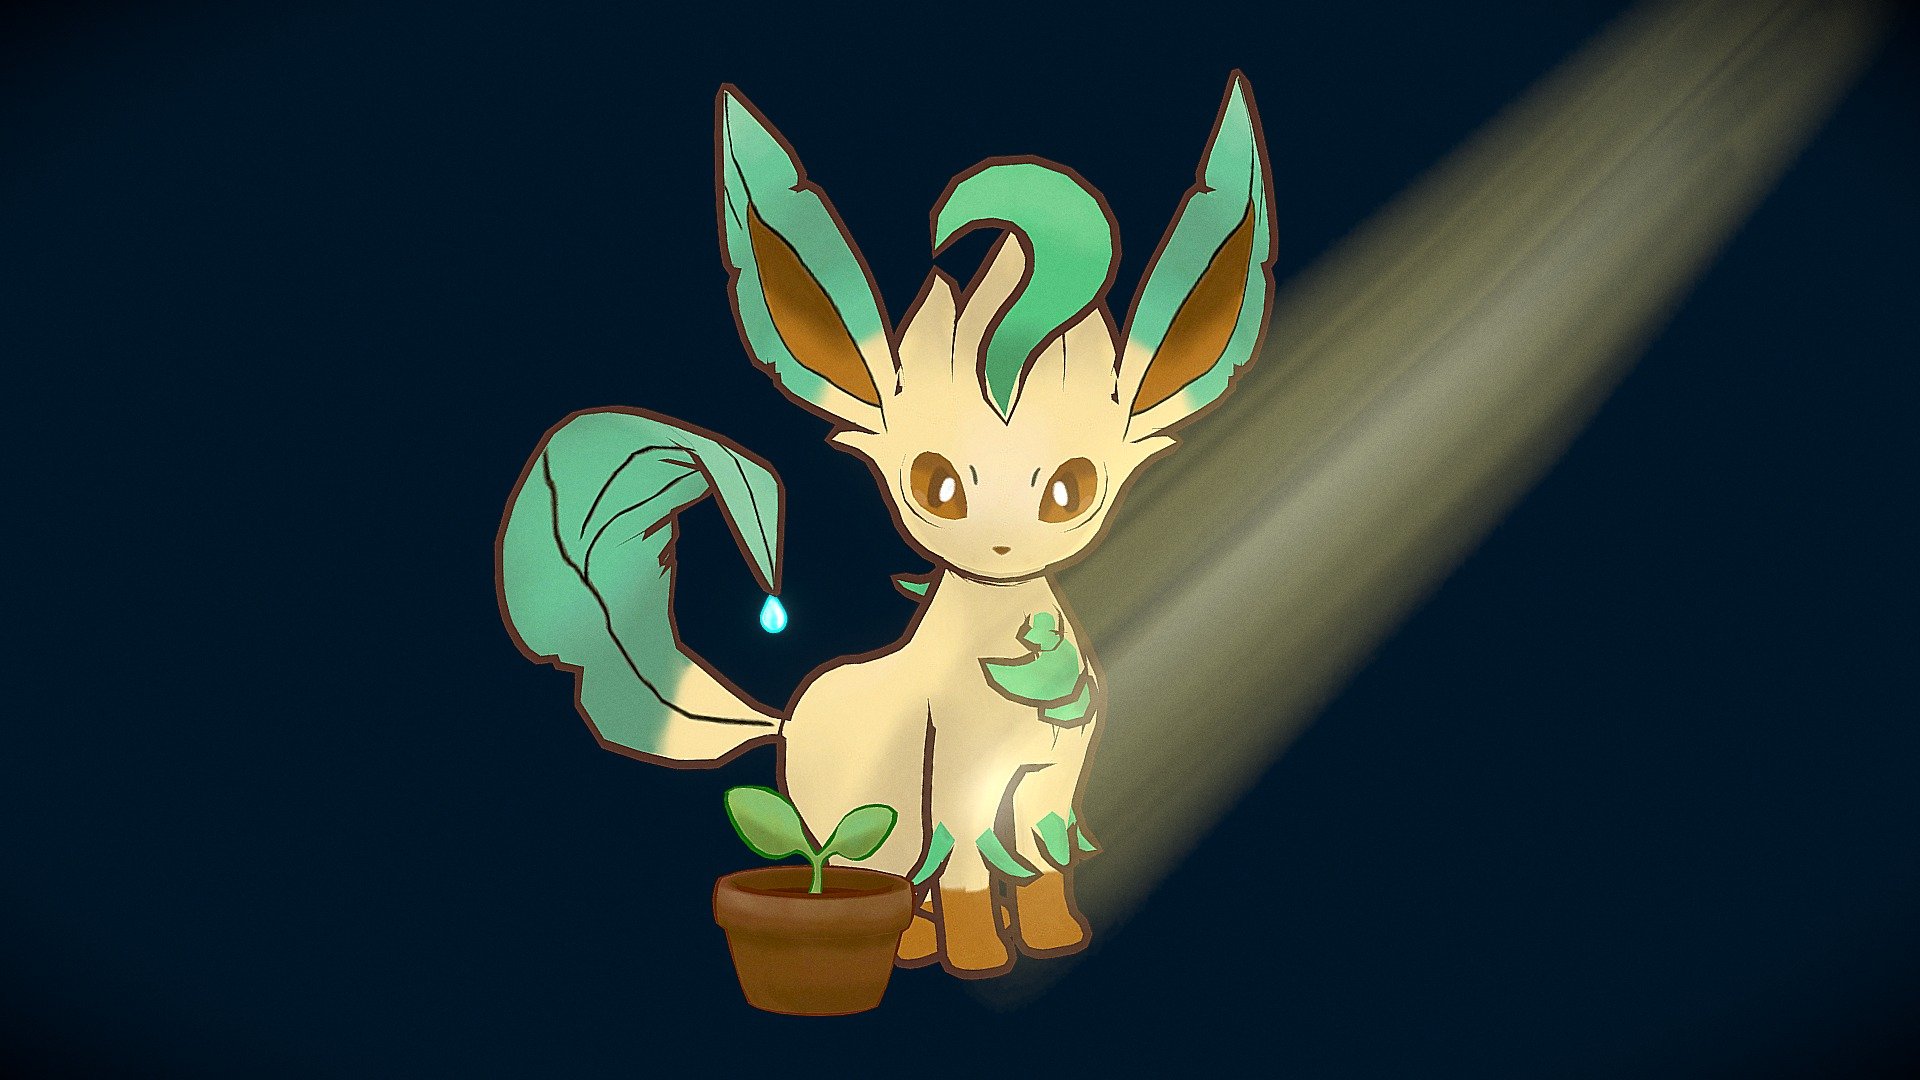 Leafeon Wallpaper 64 images